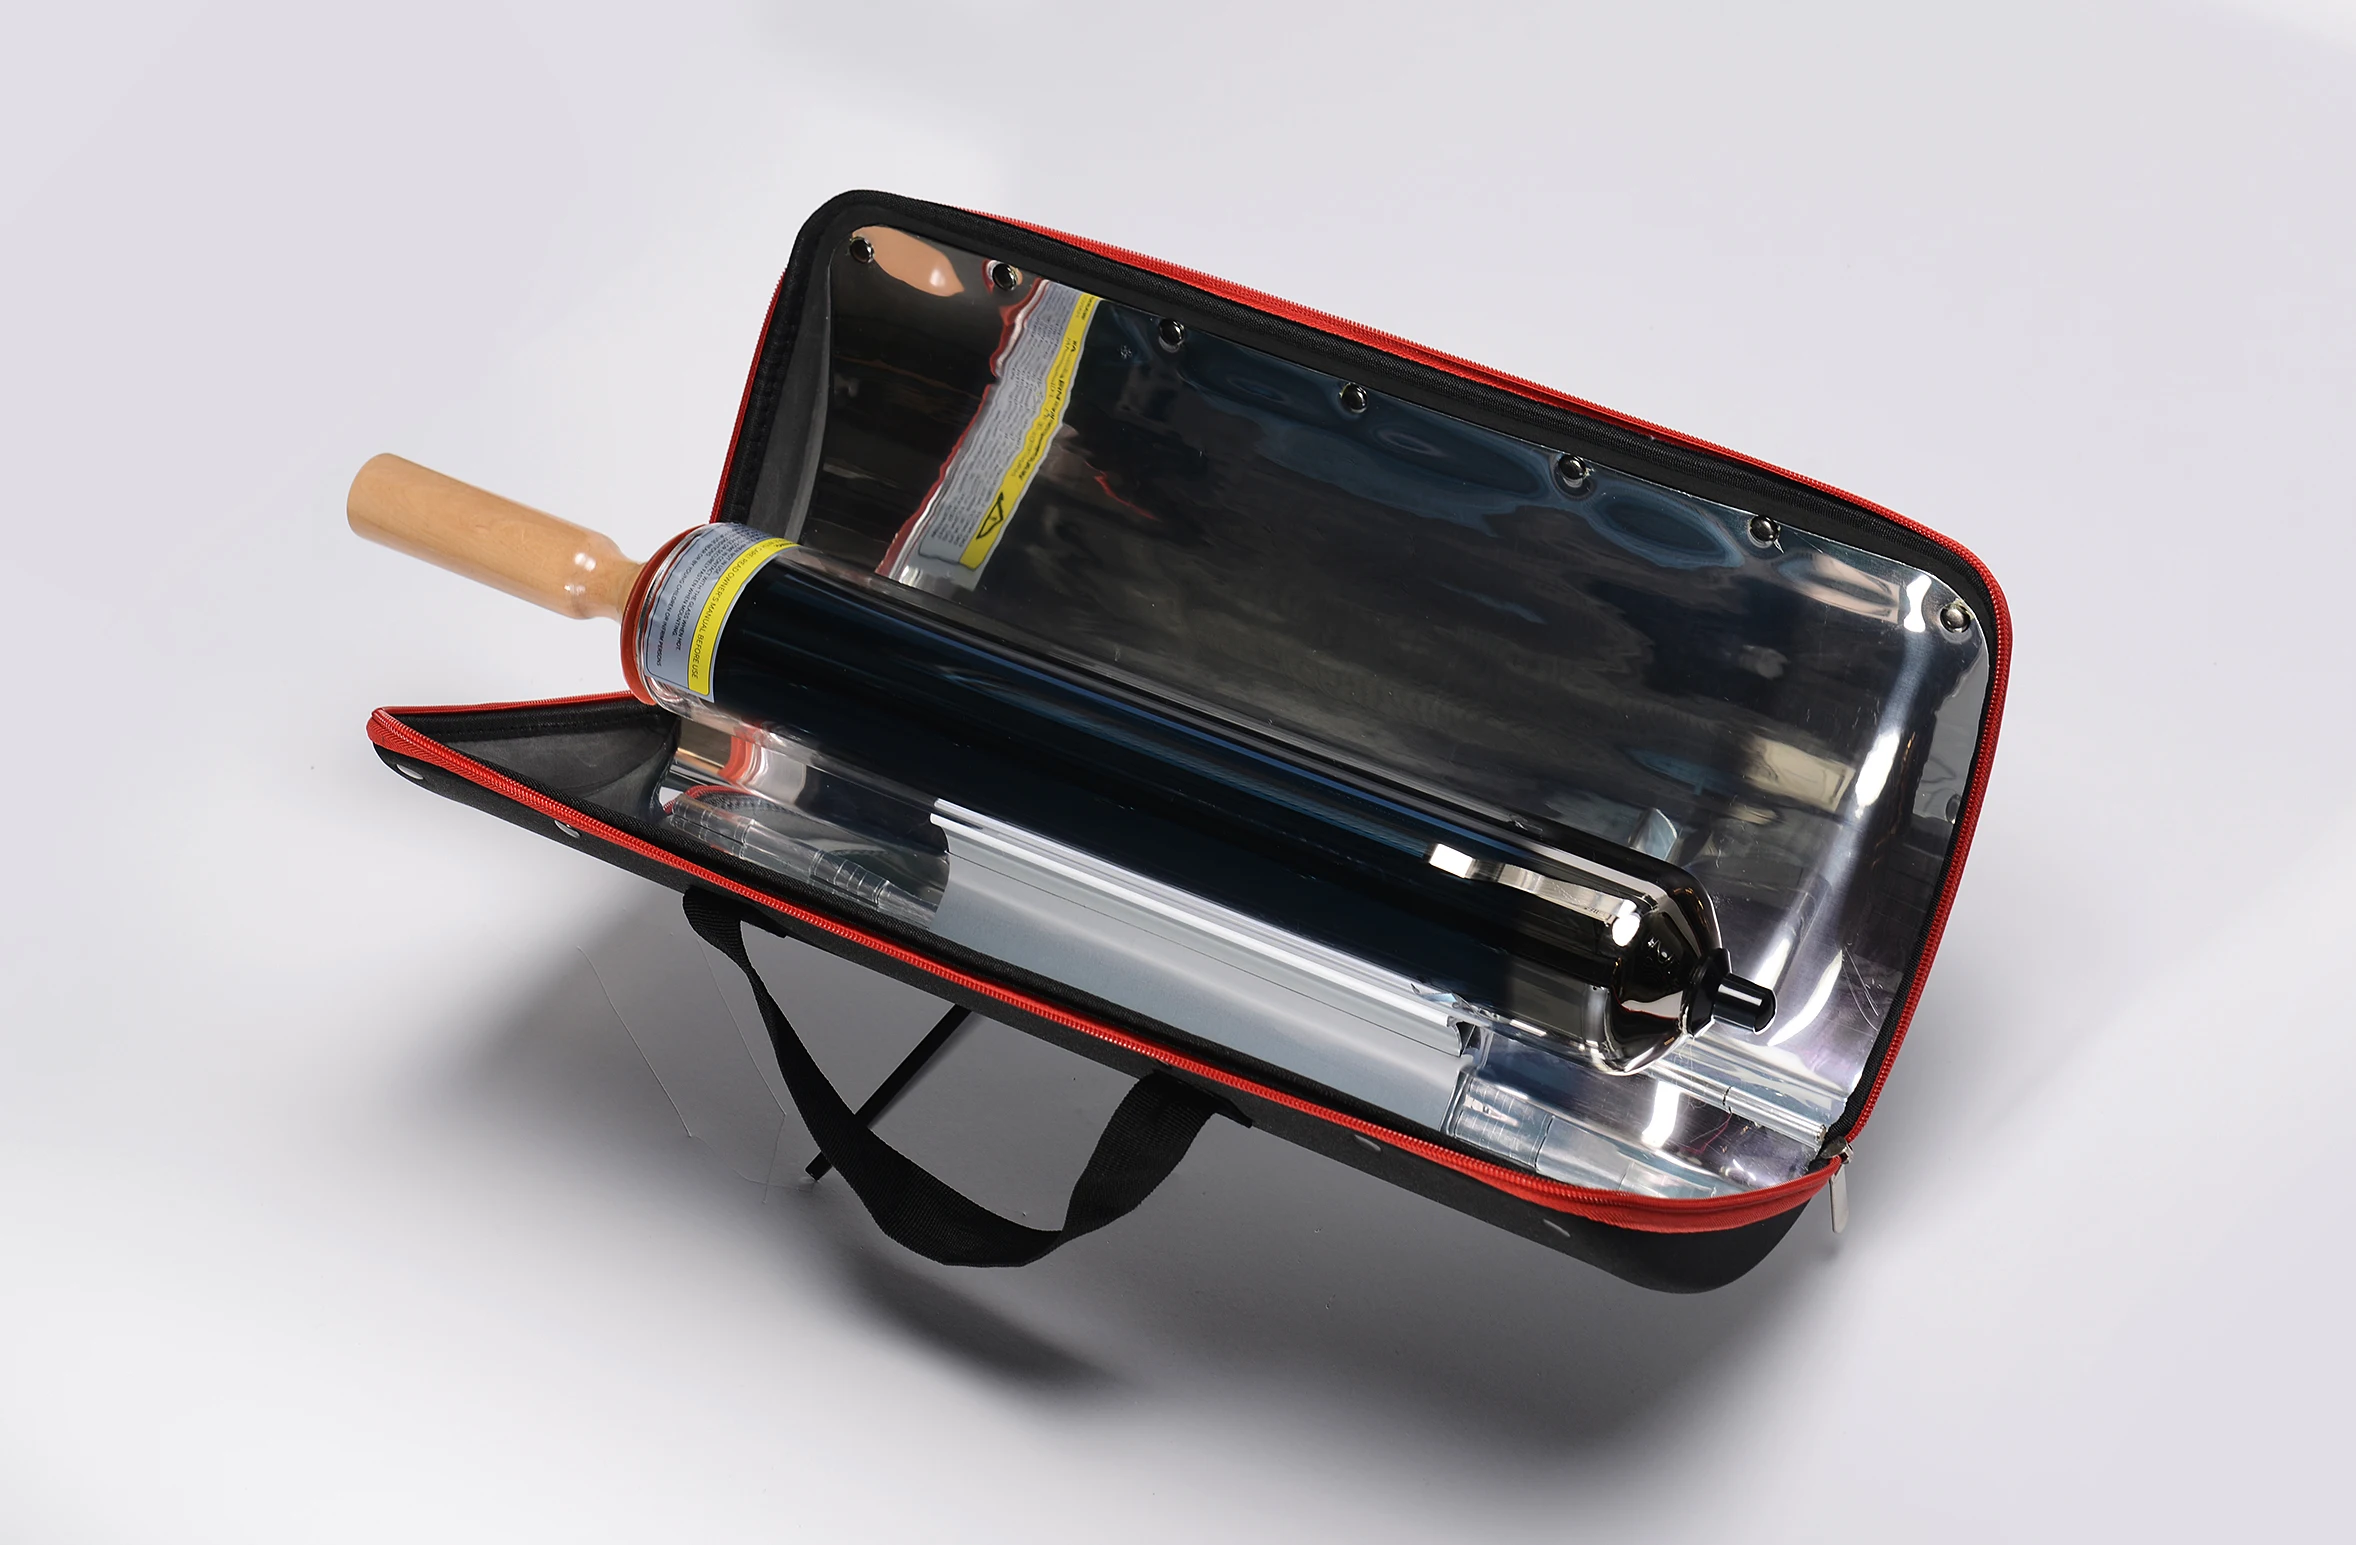 Hot Sell In Amazon High-Efficiency Solar Cooker Oven Portable BBQ Grill Solar BBQ Solar Cooker